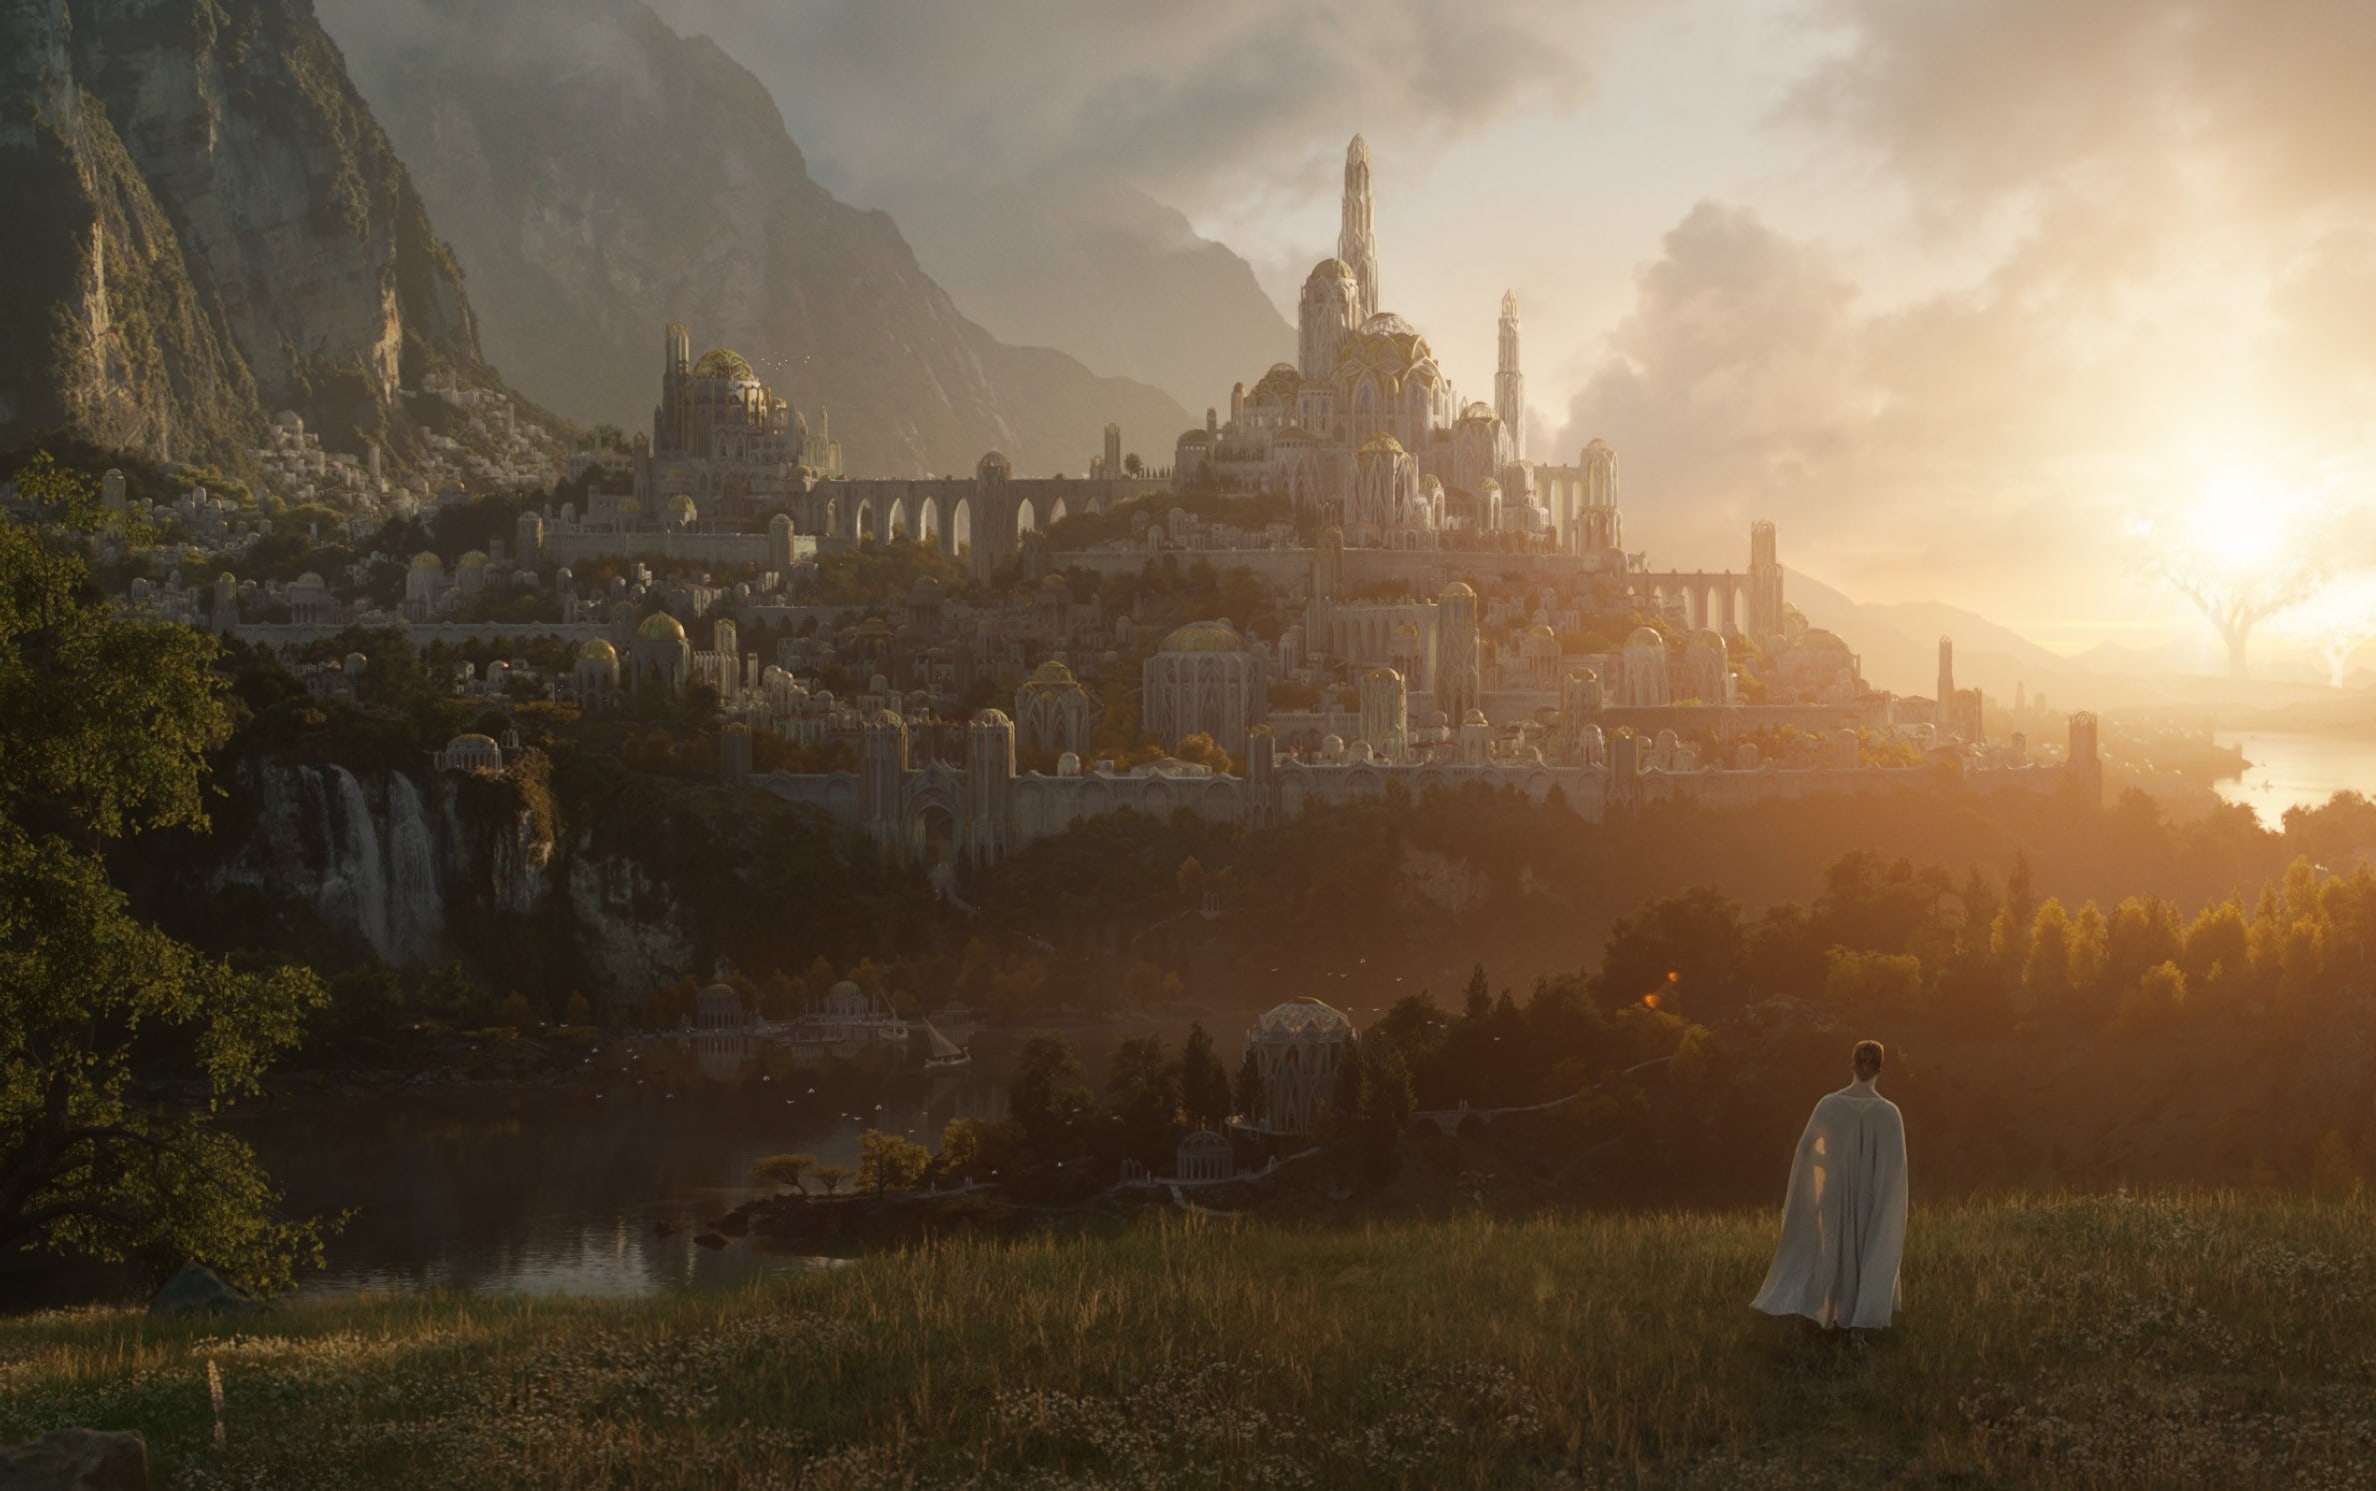 The first image from Amazon's new Lord of the Rings TV series filmed in New Zealand.